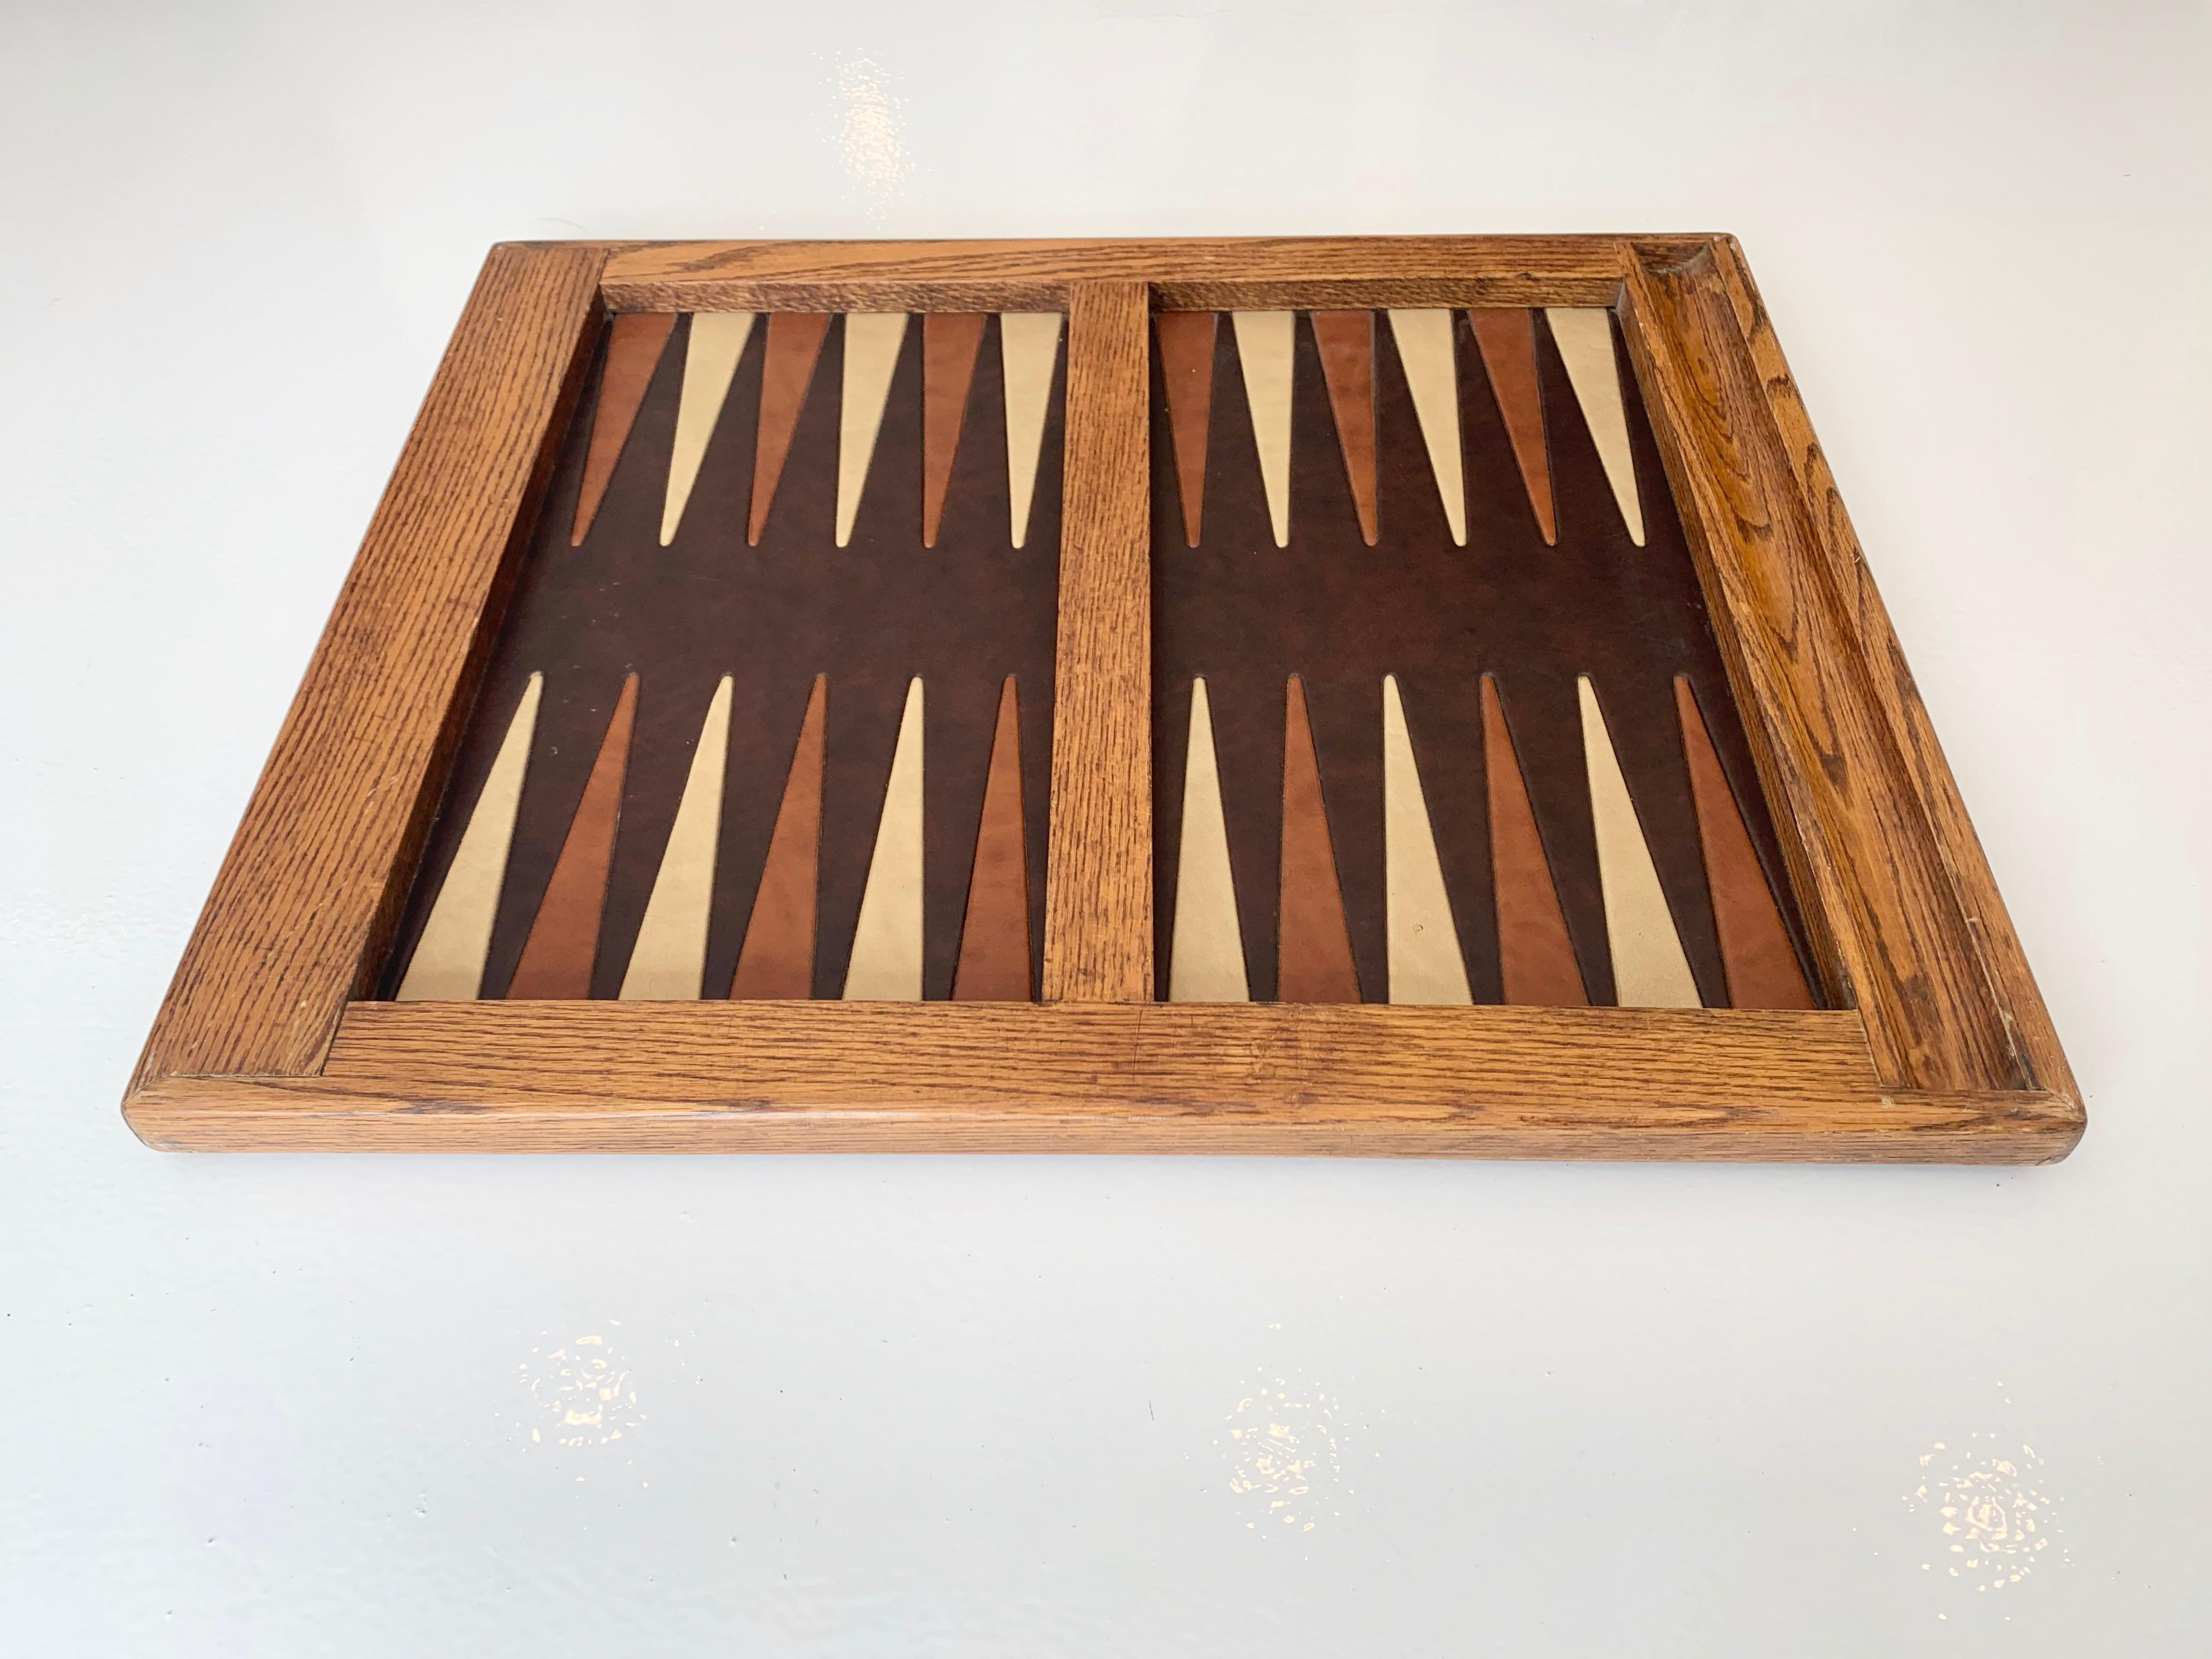 Vintage oak and leather backgammon board. Leather and wood in good vintage condition. Great tabletop board.